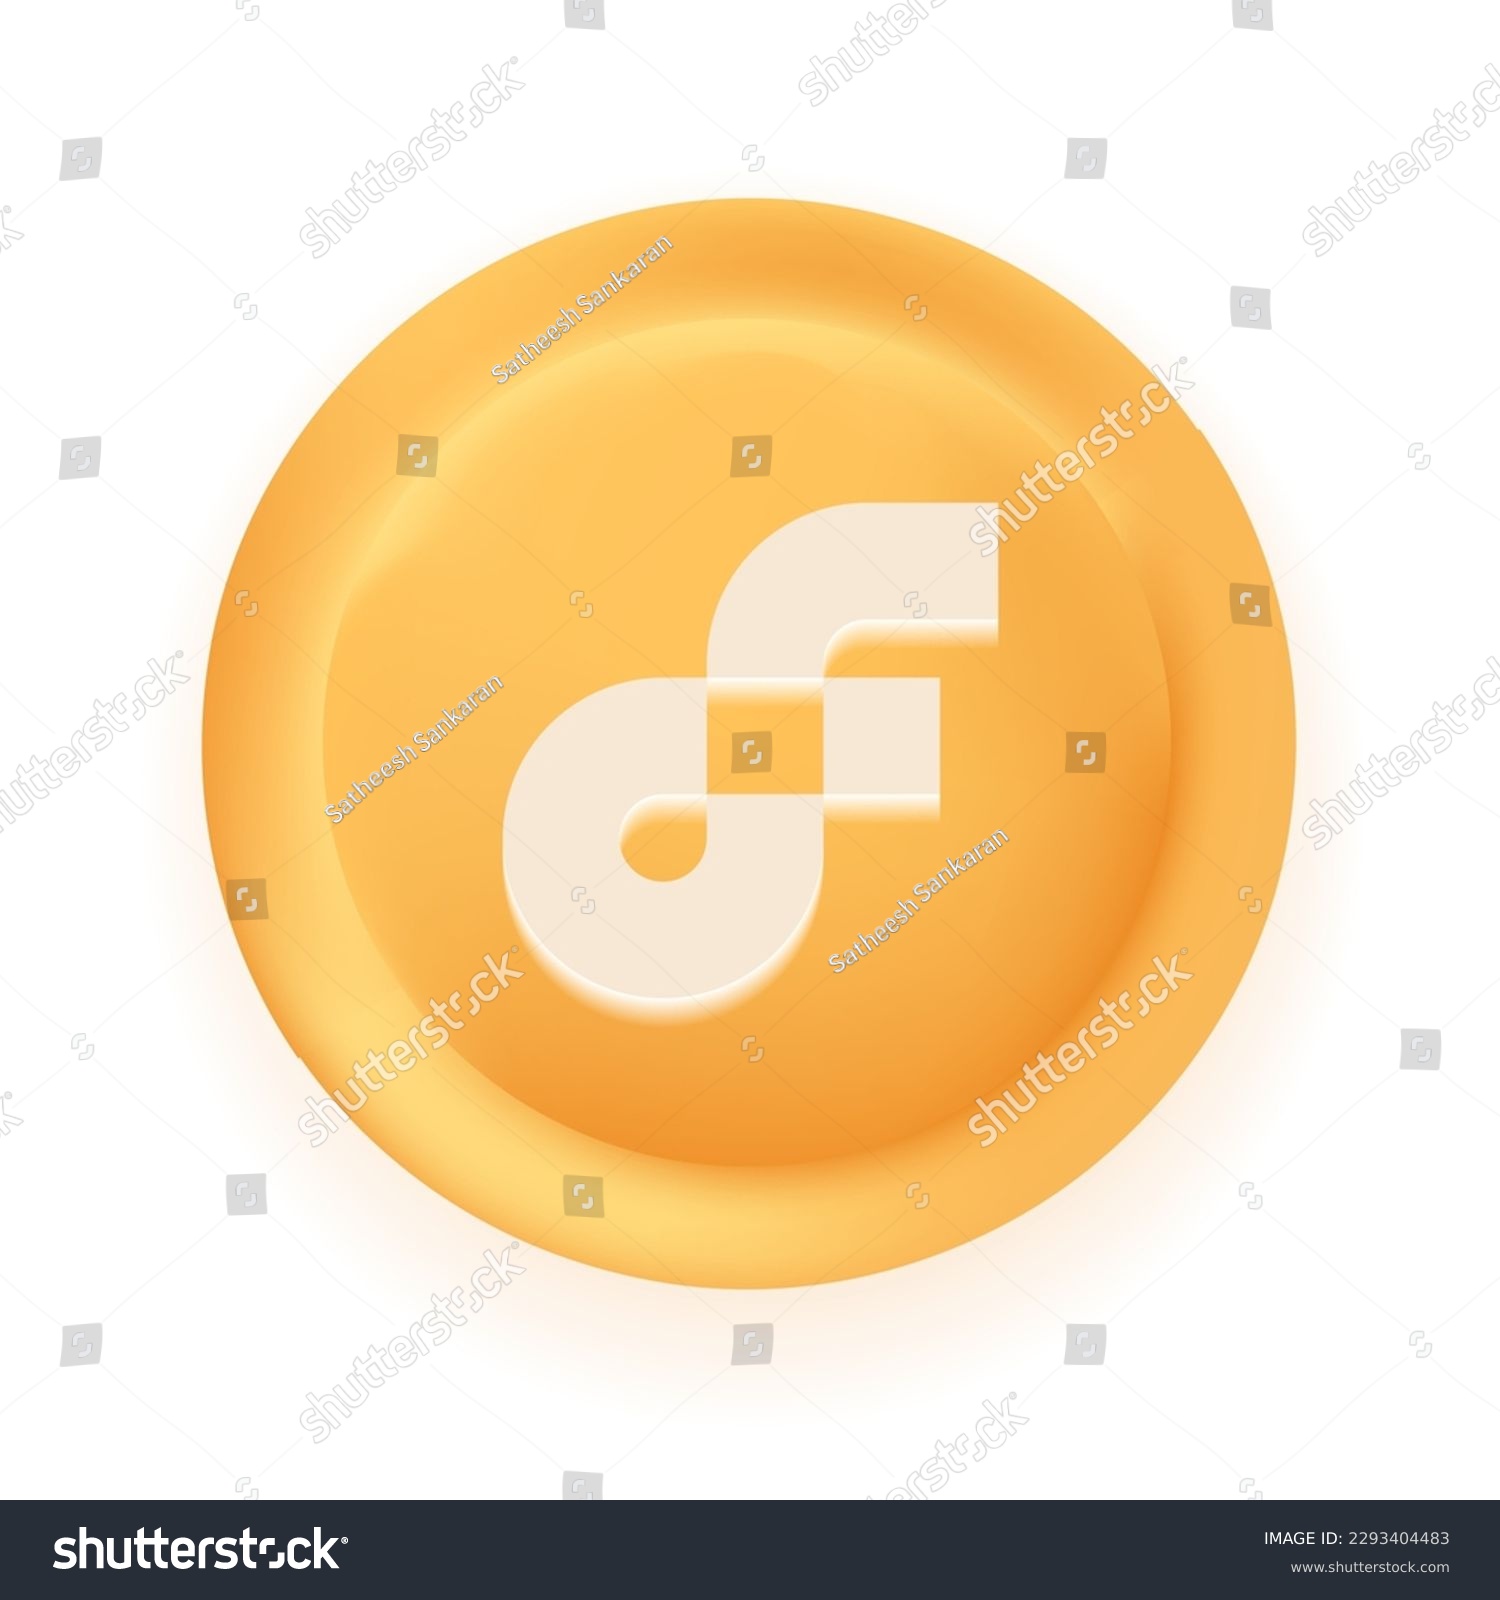 SVG of Flow (FLOW) crypto currency 3D coin vector illustration isolated on white background. Can be used as virtual money icon, logo, emblem, sticker and badge designs. svg